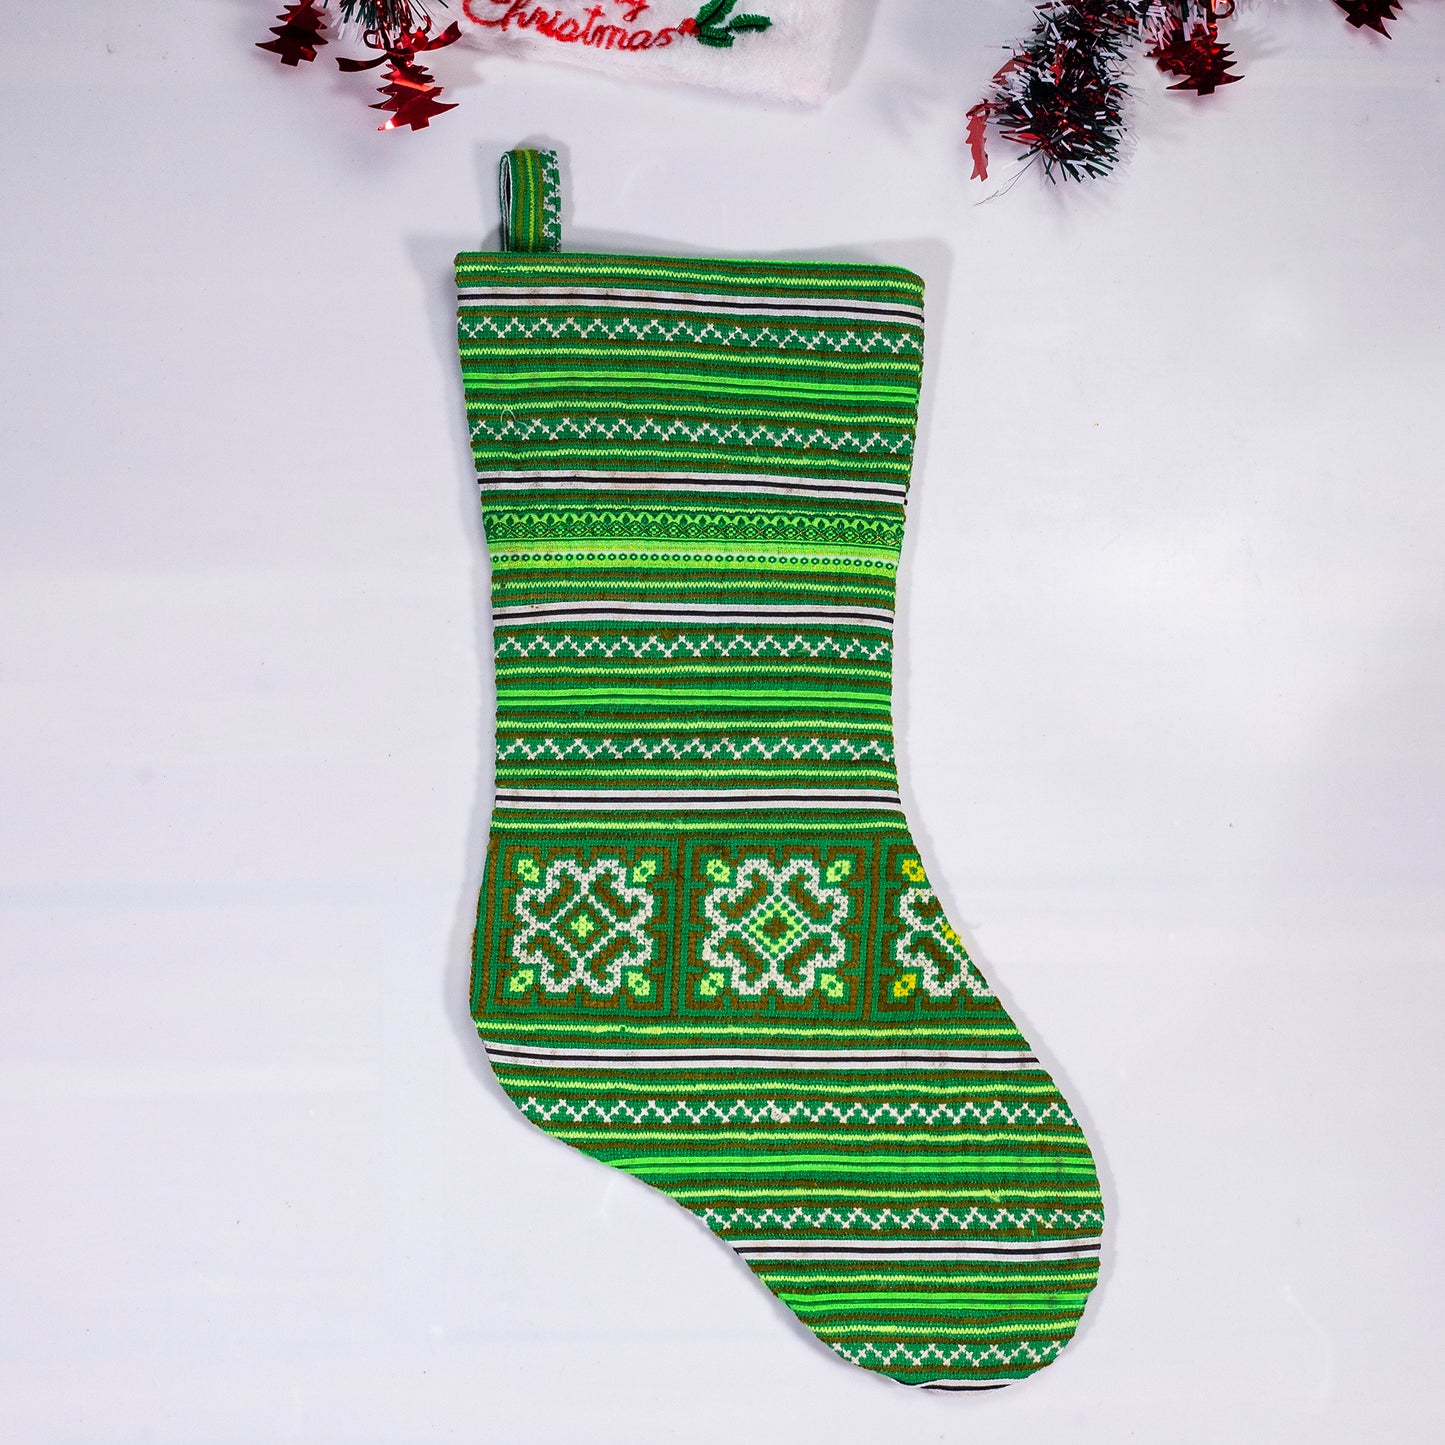 Christmas Stockings - Green embroidery